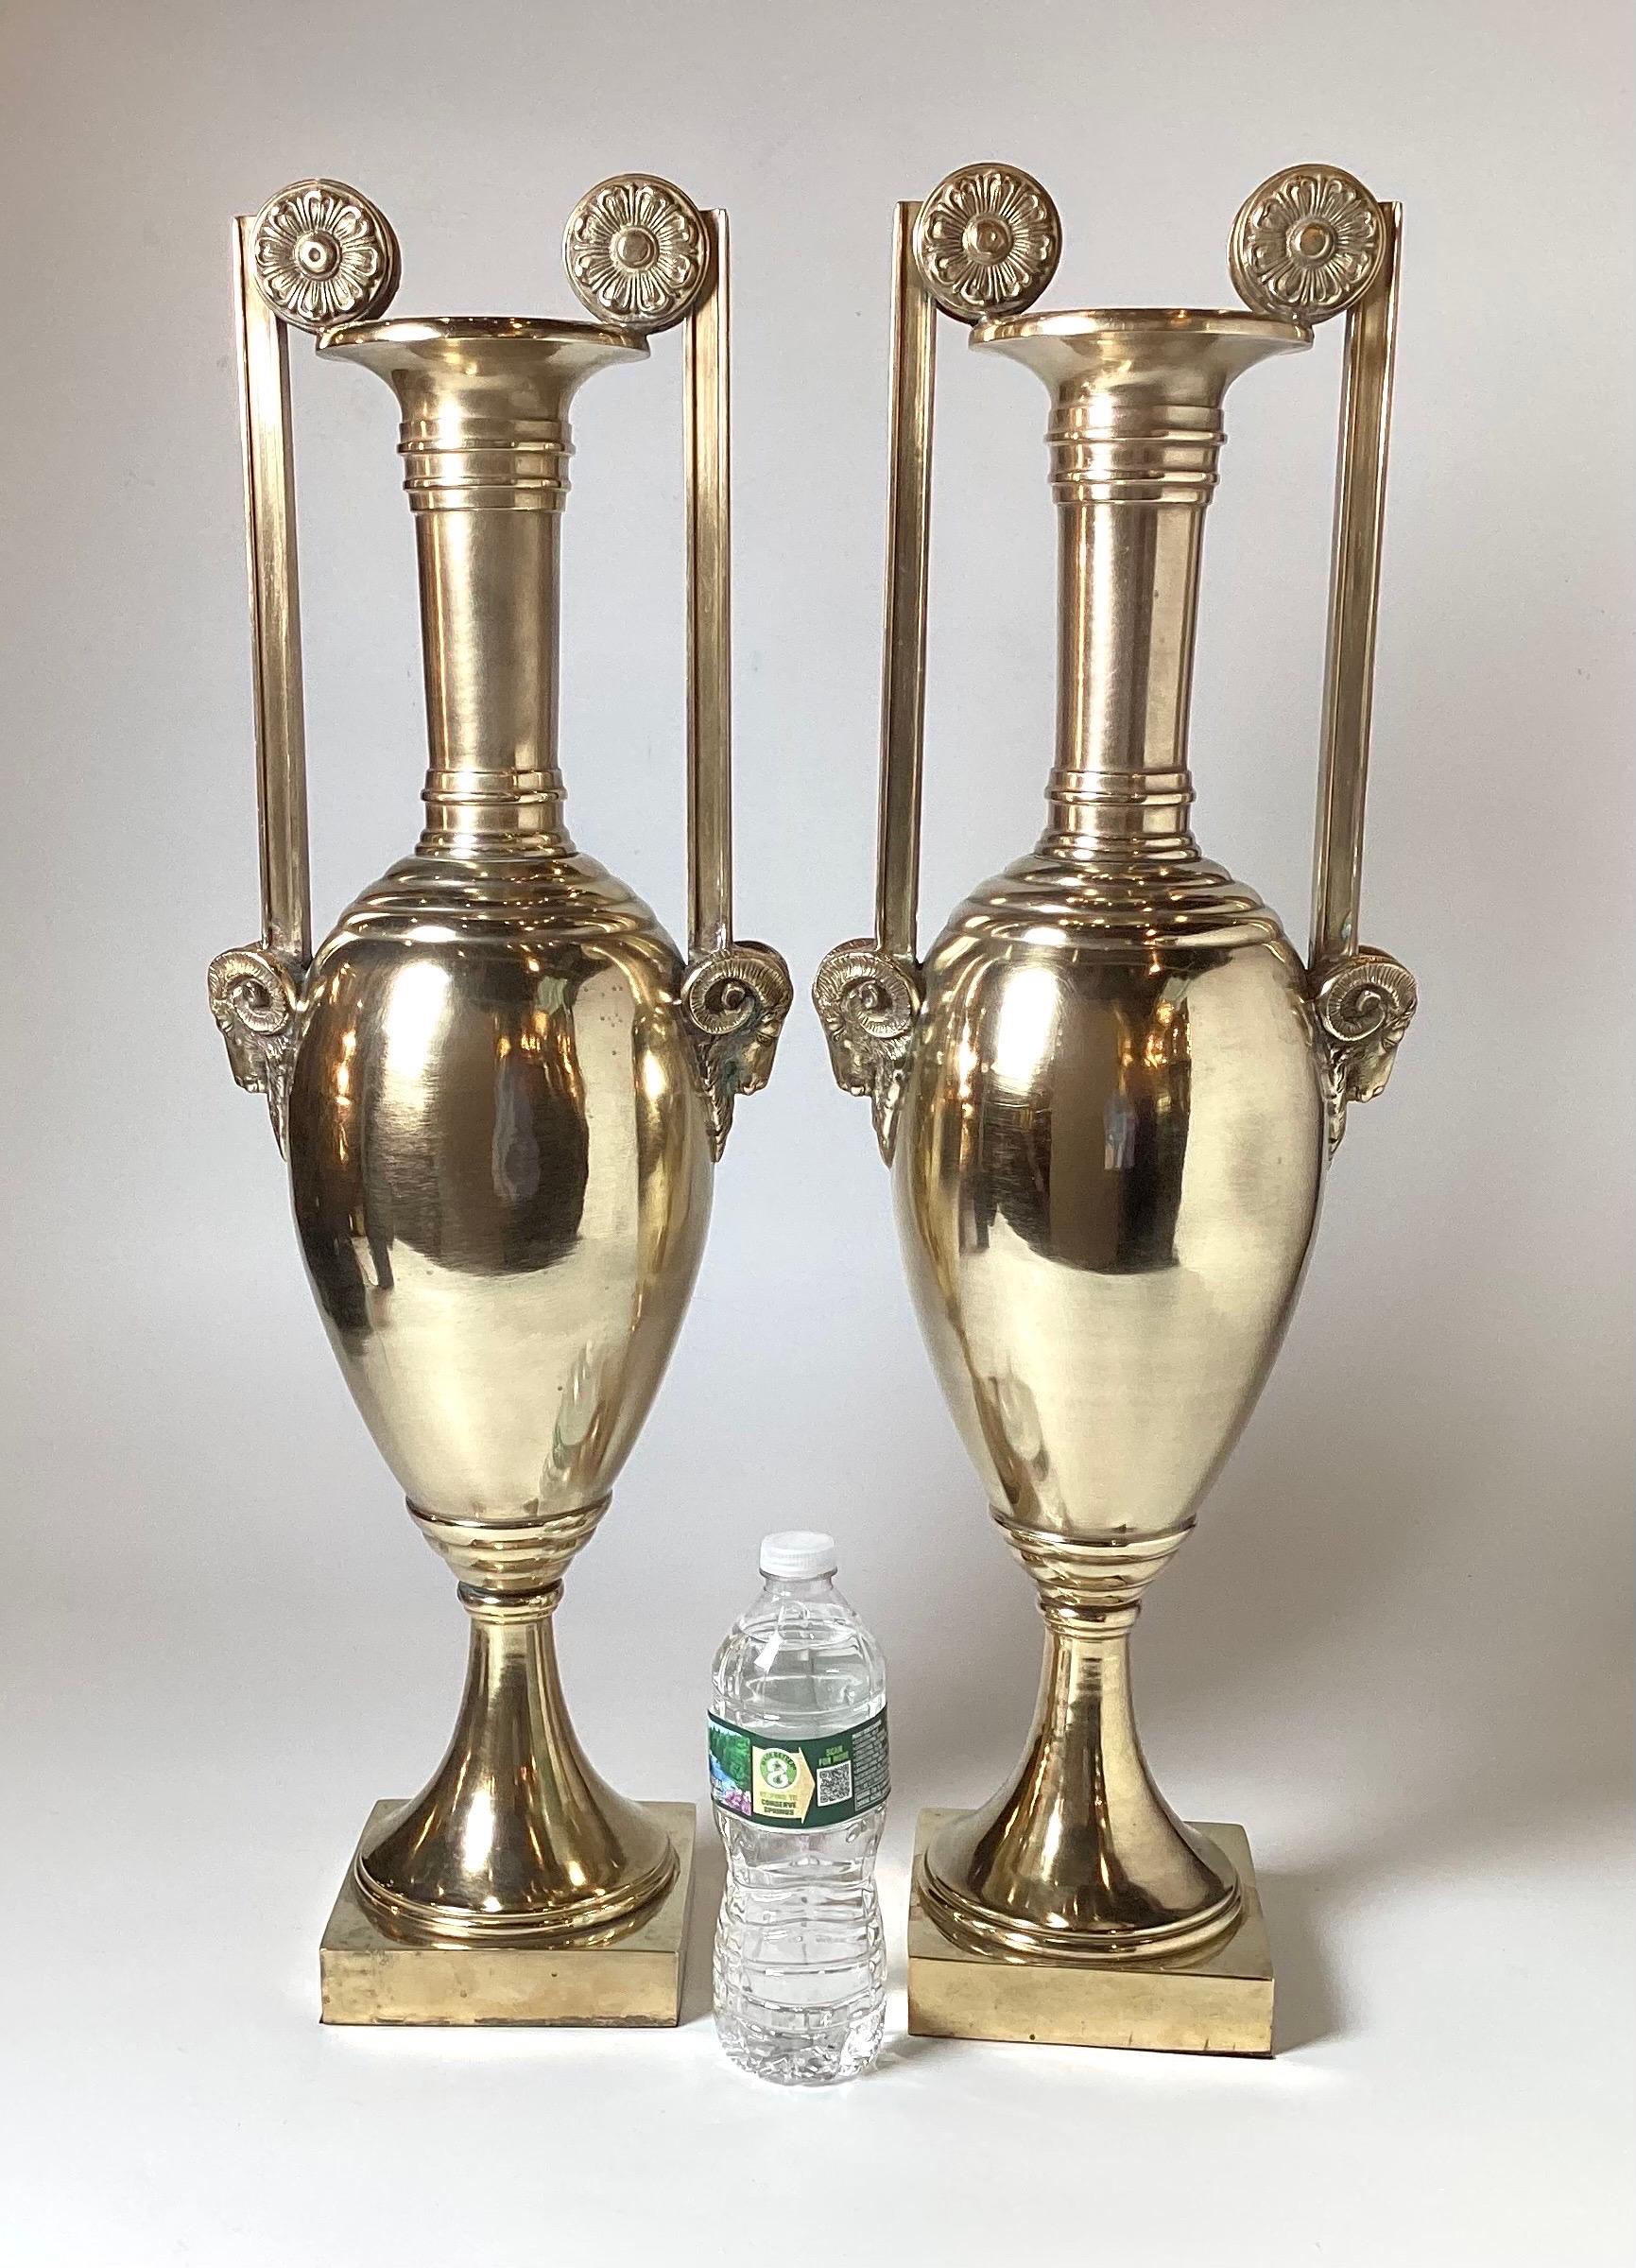 A handsome pair of elongated neoclassical cast and polished brass urns. The straight slender handles with cast rosettes at the tops and rams head detail at the bottom. The urns with a bulbous center resting on a 5.5 inch square pedestal base. Each